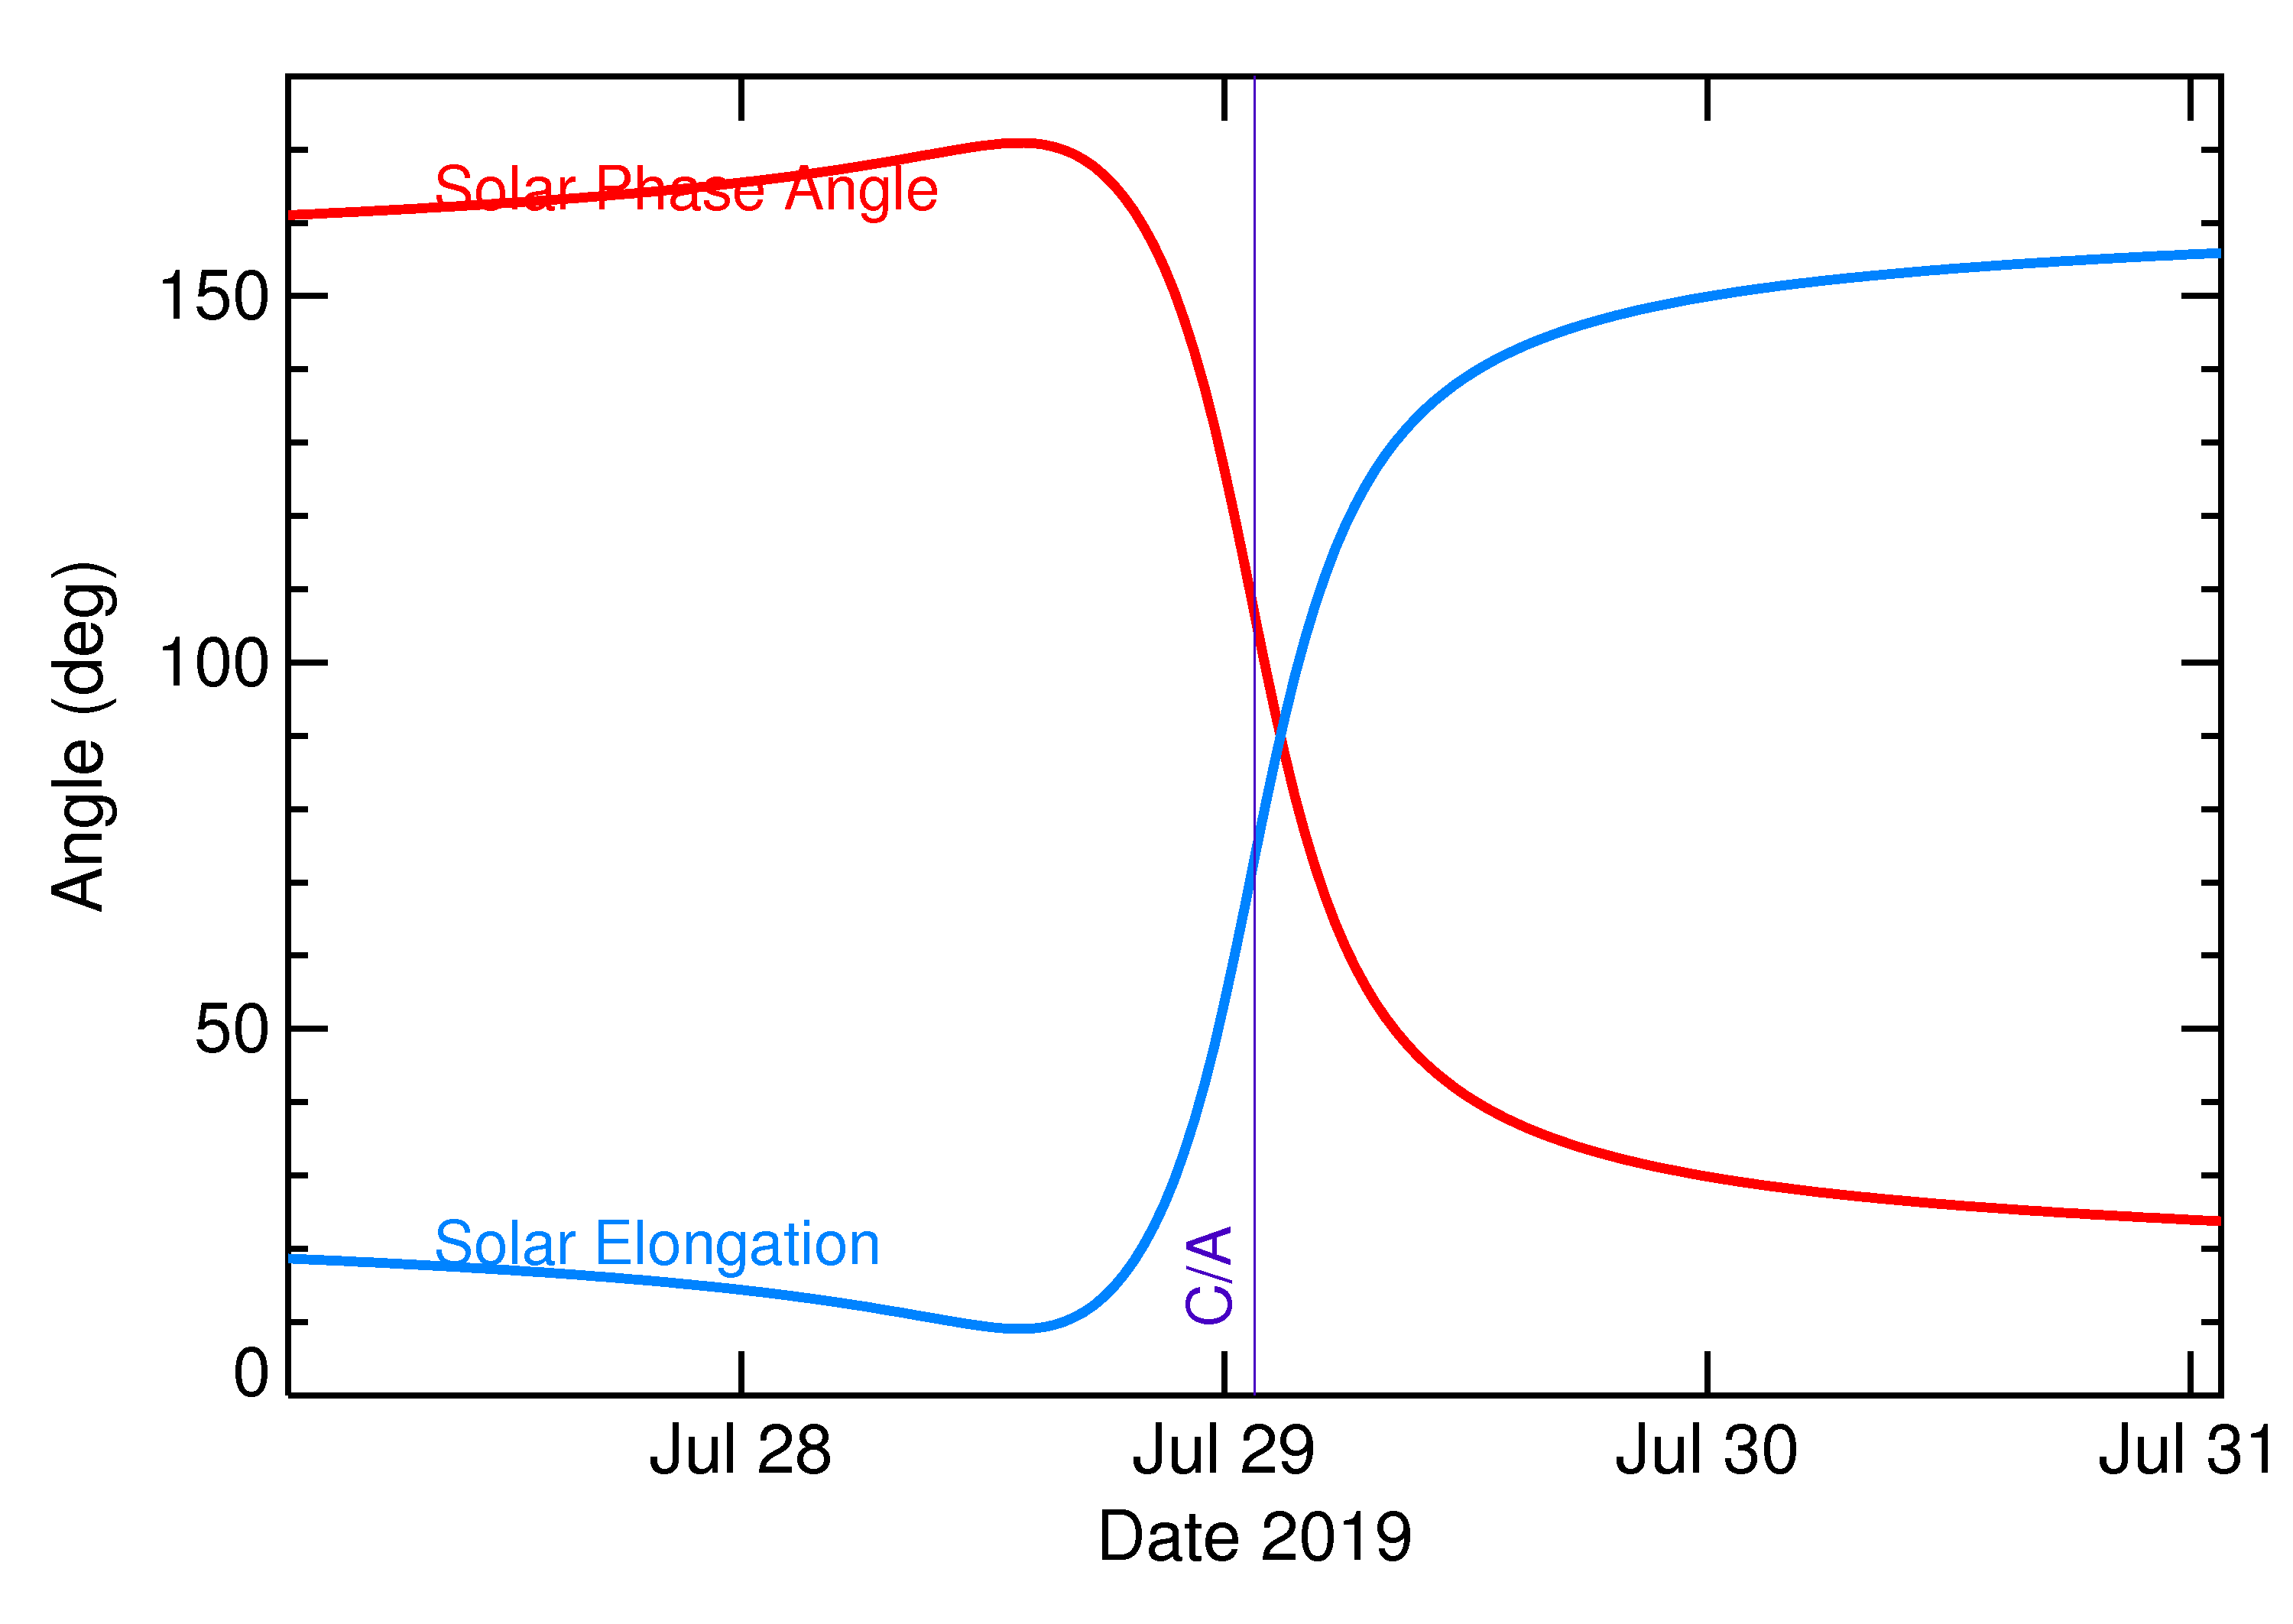 Solar Elongation and Solar Phase Angle of 2019 ON3 in the days around closest approach